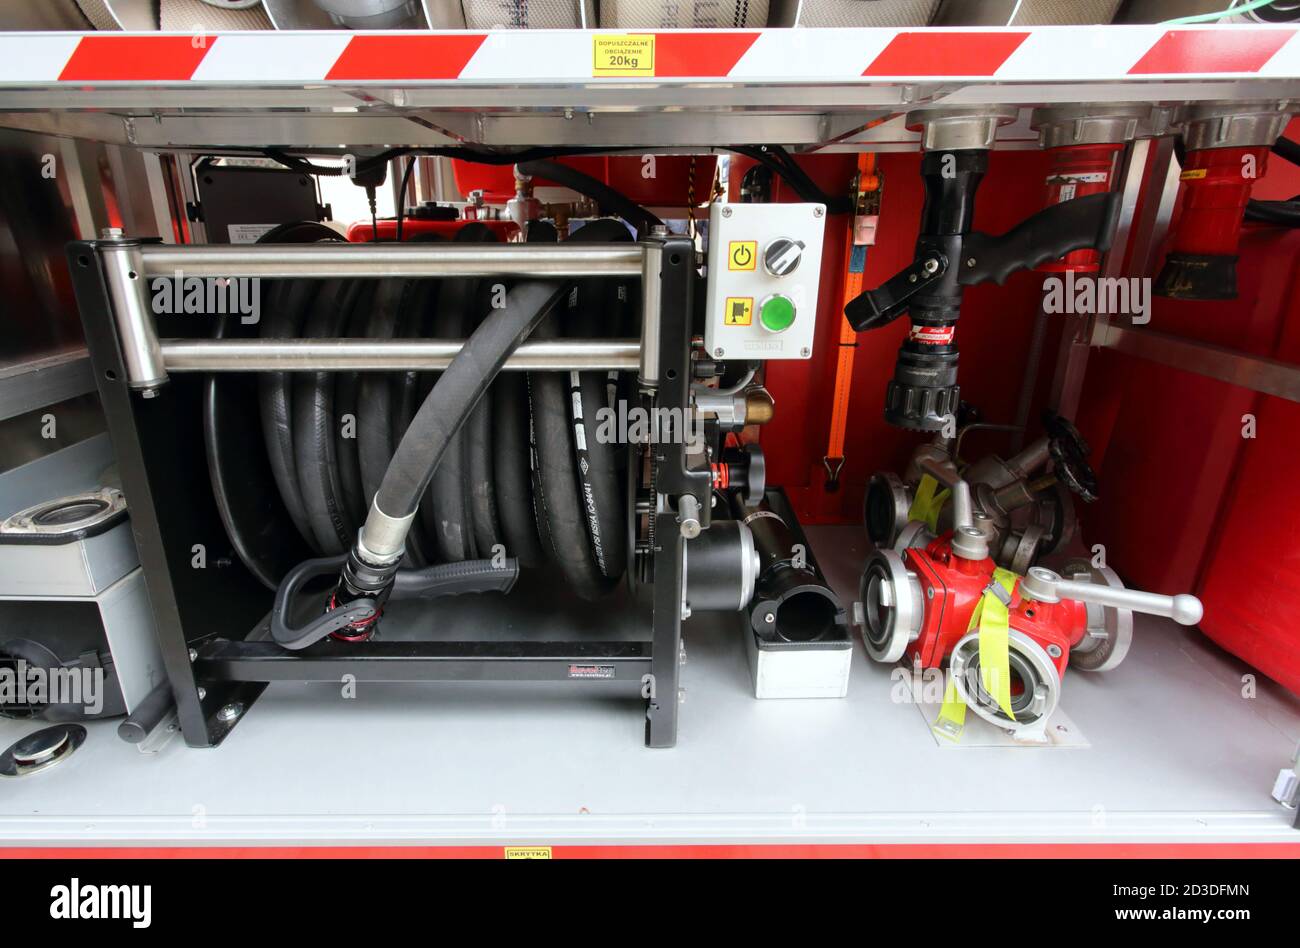 Cracow. Krakow. Poland. Three-way fire spring, rubber hose and nozzles in the fire truck storage compartment. Stock Photo